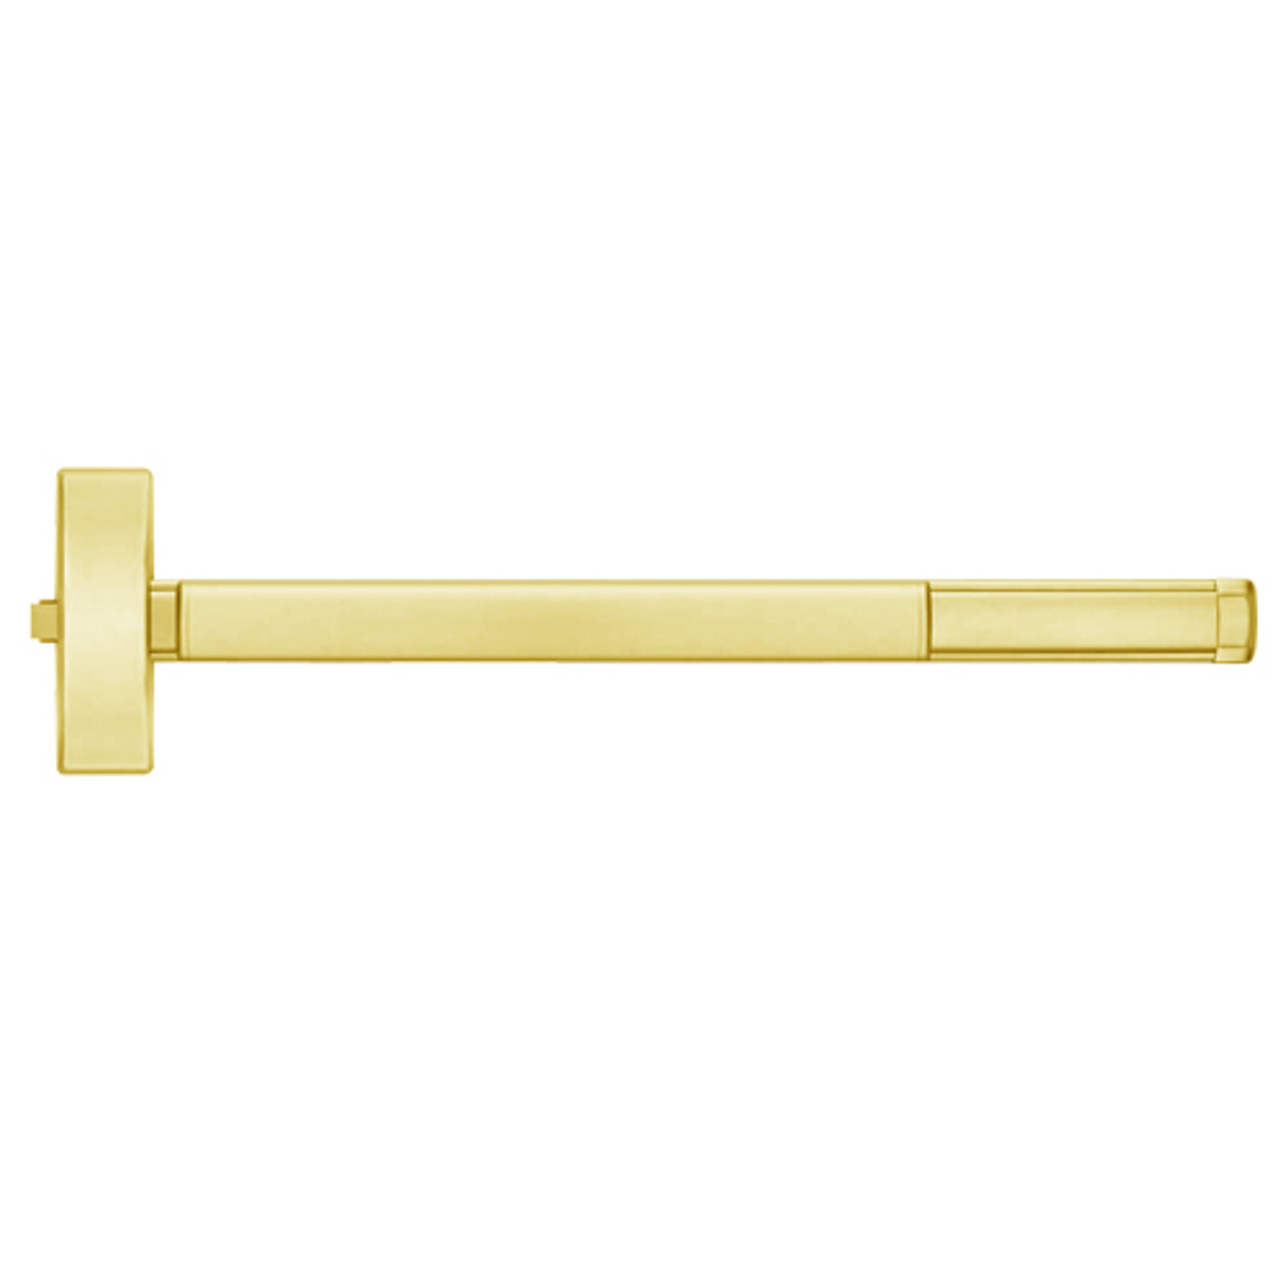 TS2102-605-36 PHI 2100 Series Non Fire Rated Apex Rim Exit Device with Touchbar Monitoring Switch Prepped for Dummy Trim in Bright Brass Finish